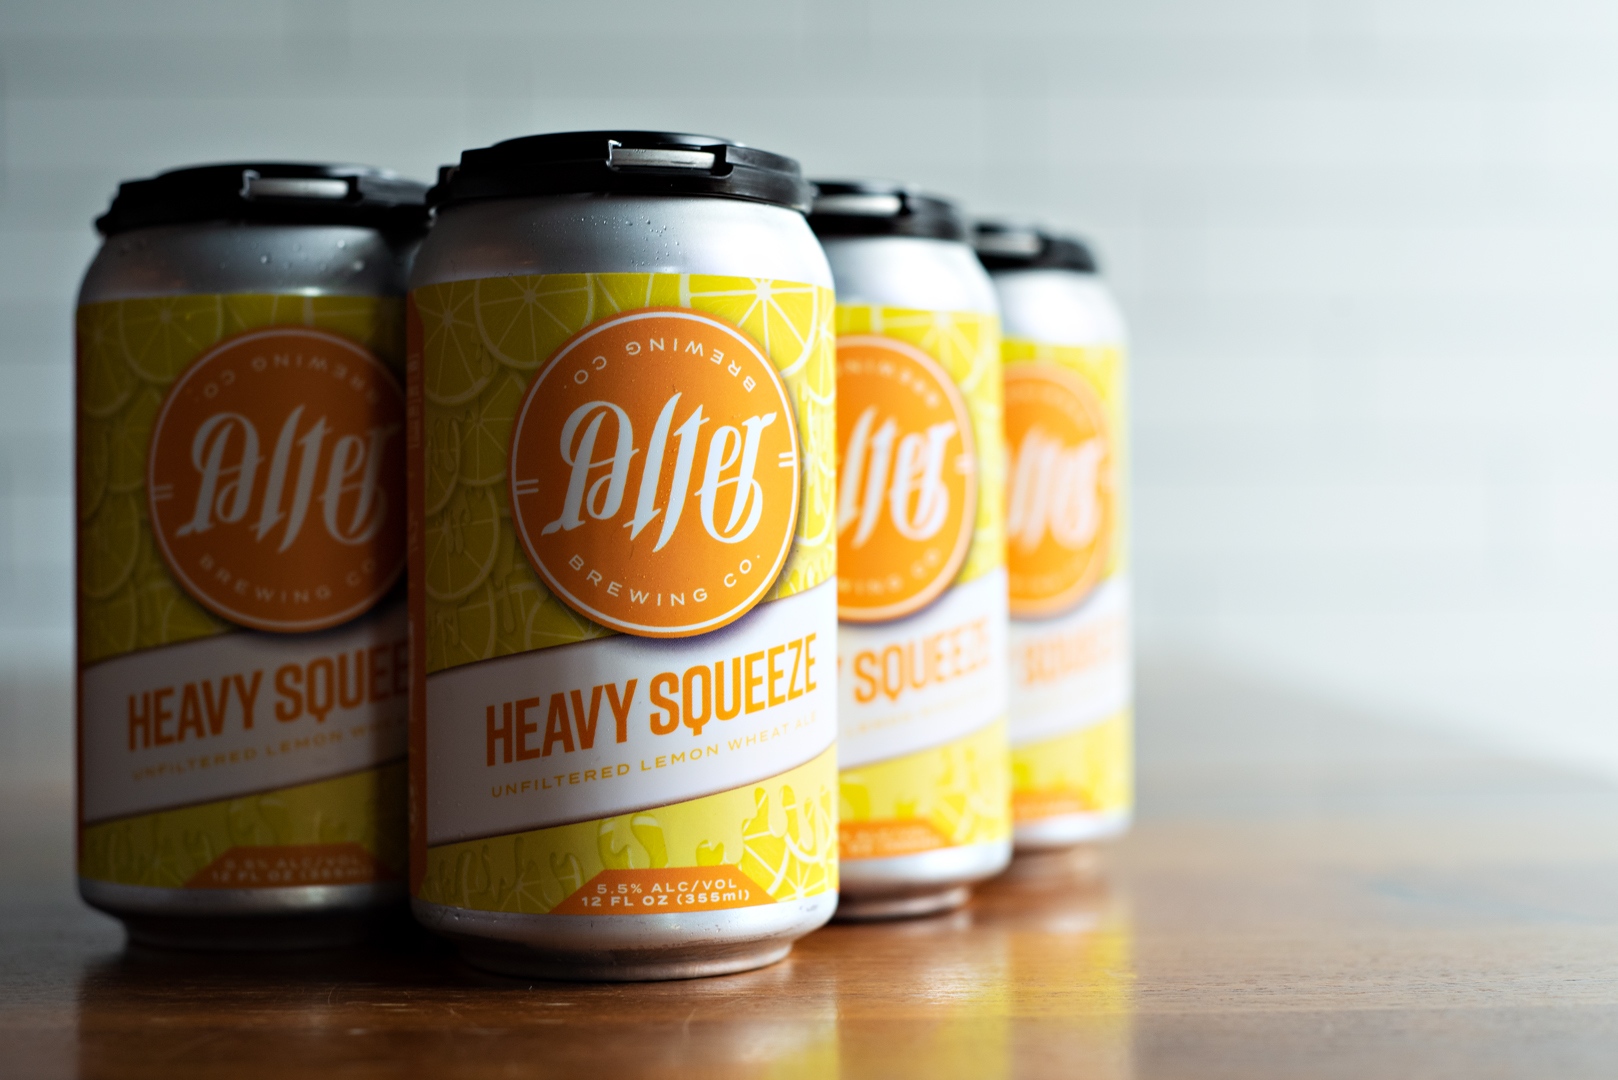 Heavy Squeeze by Alter Brewing